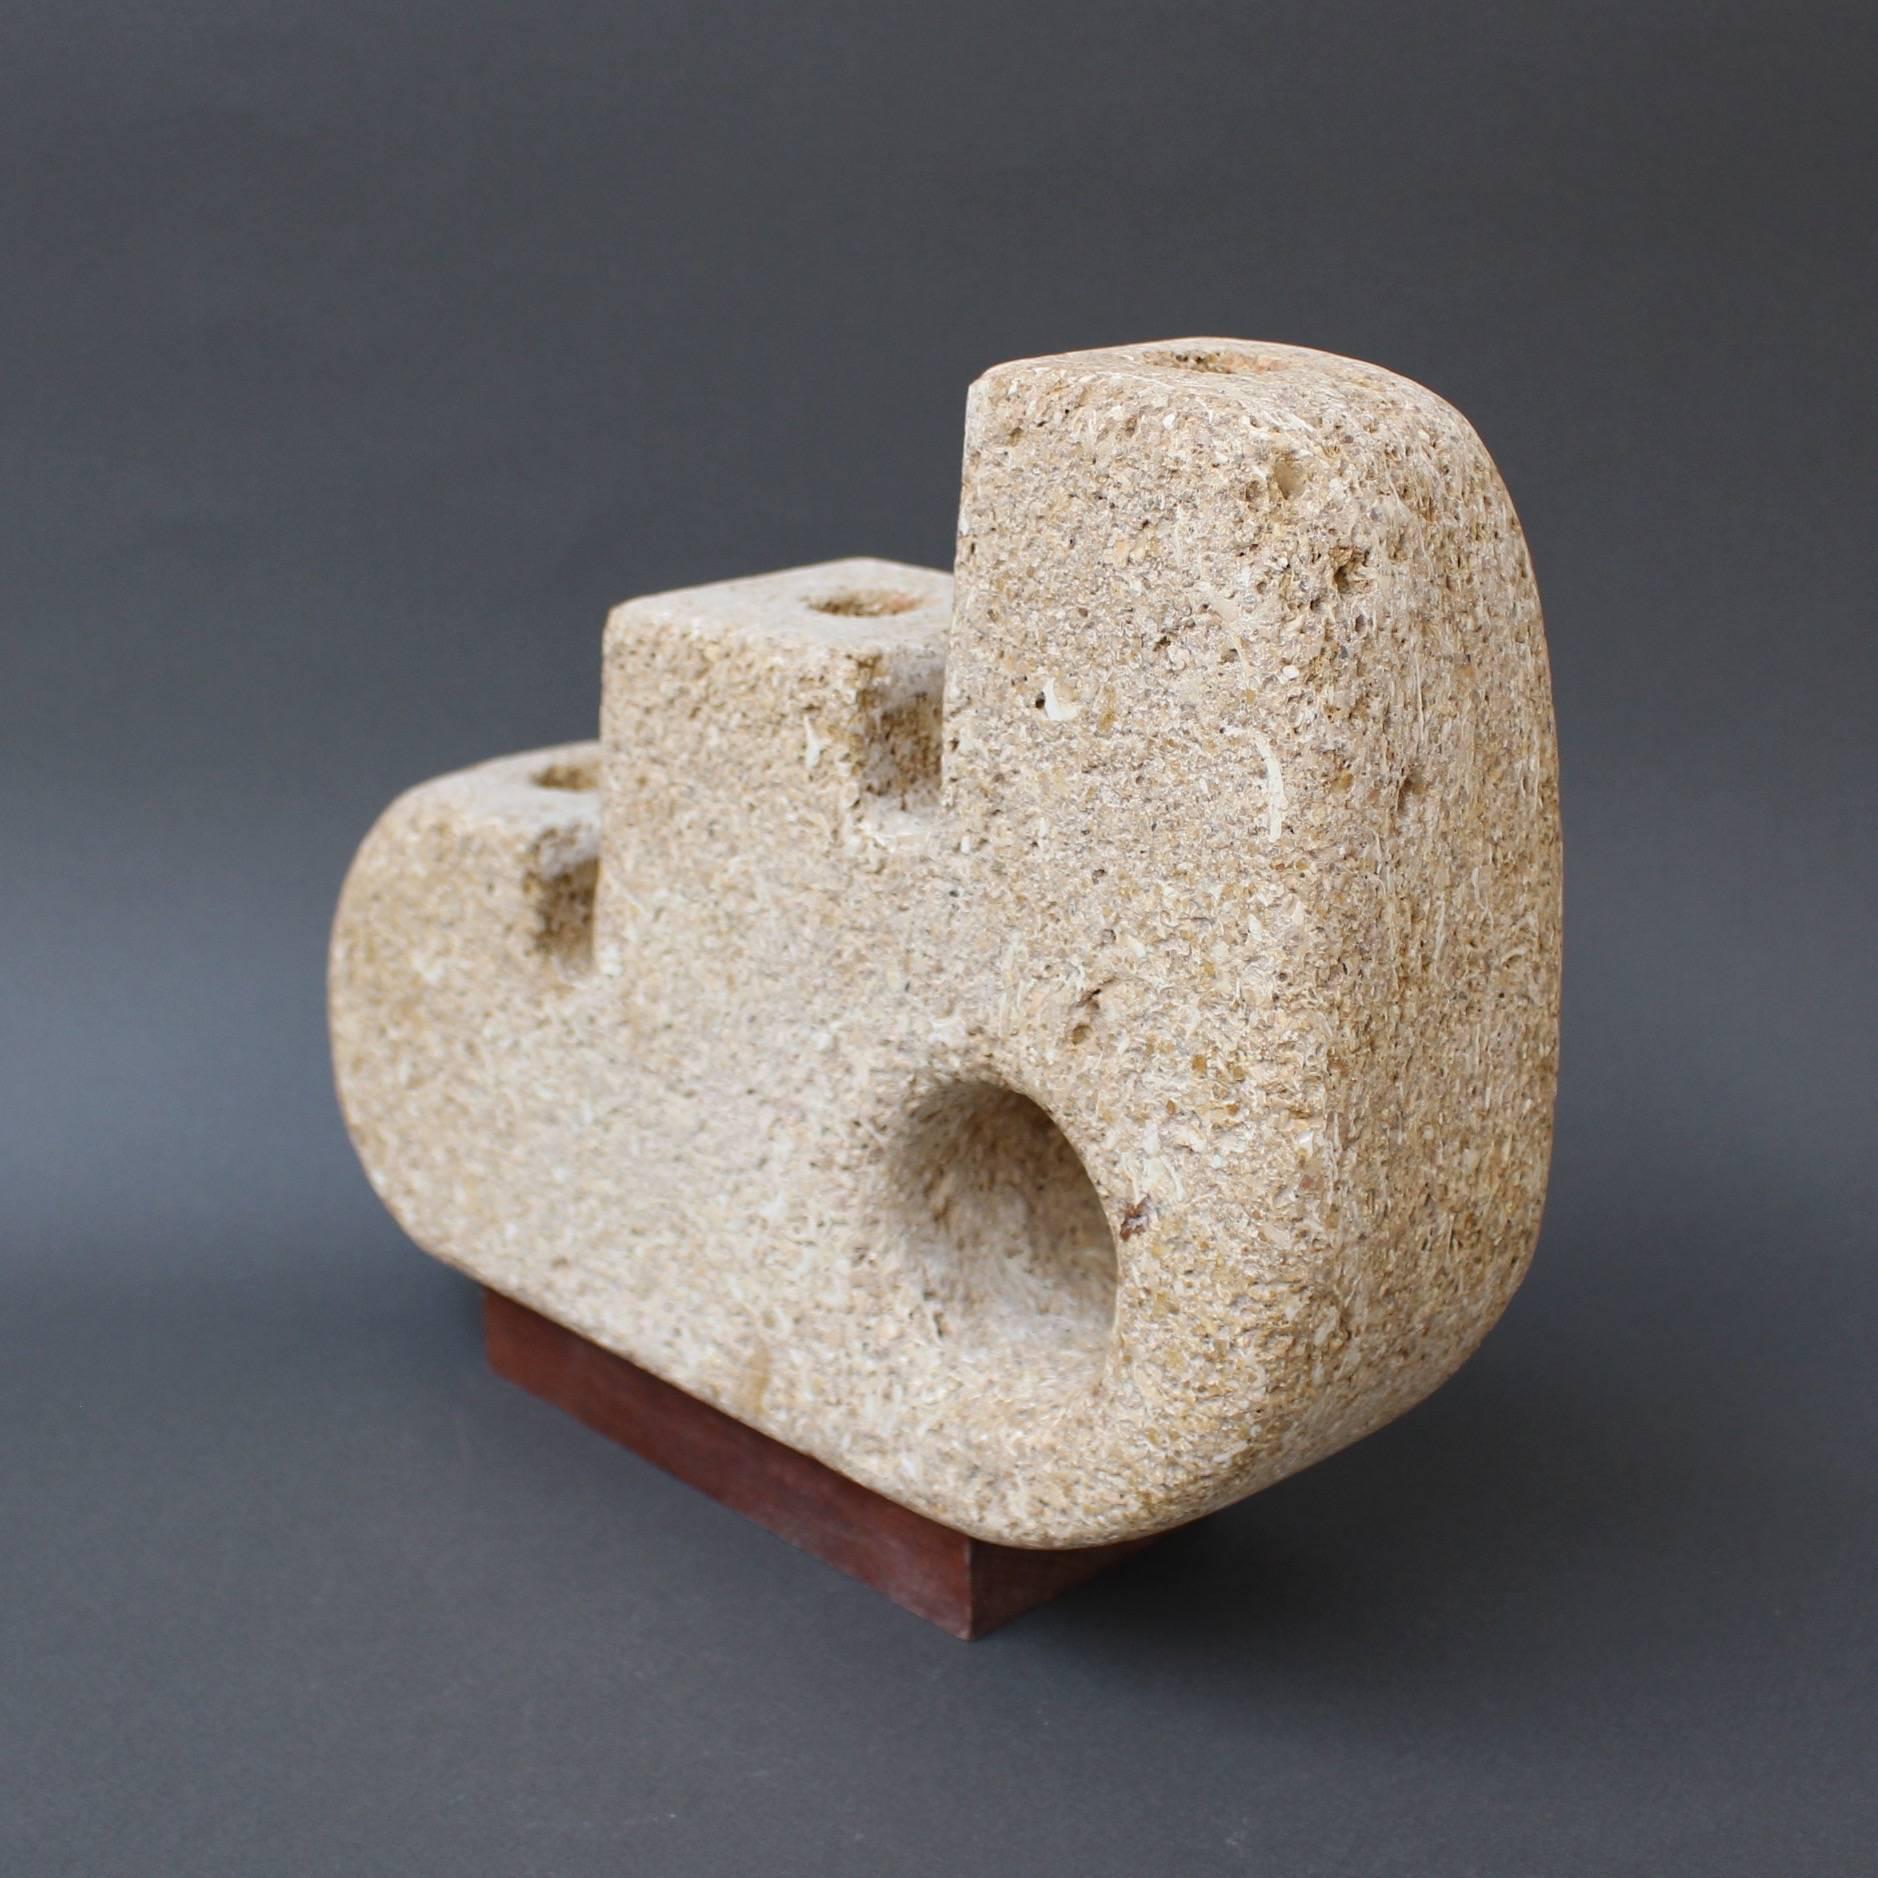 Limestone sculpted candle stand (circa 1970s). A weighty, Picasso-like, sculpted form with three descending levels with hollows to support candles. The limestone has retained its organic aspect created in nature from remains of marine life such as